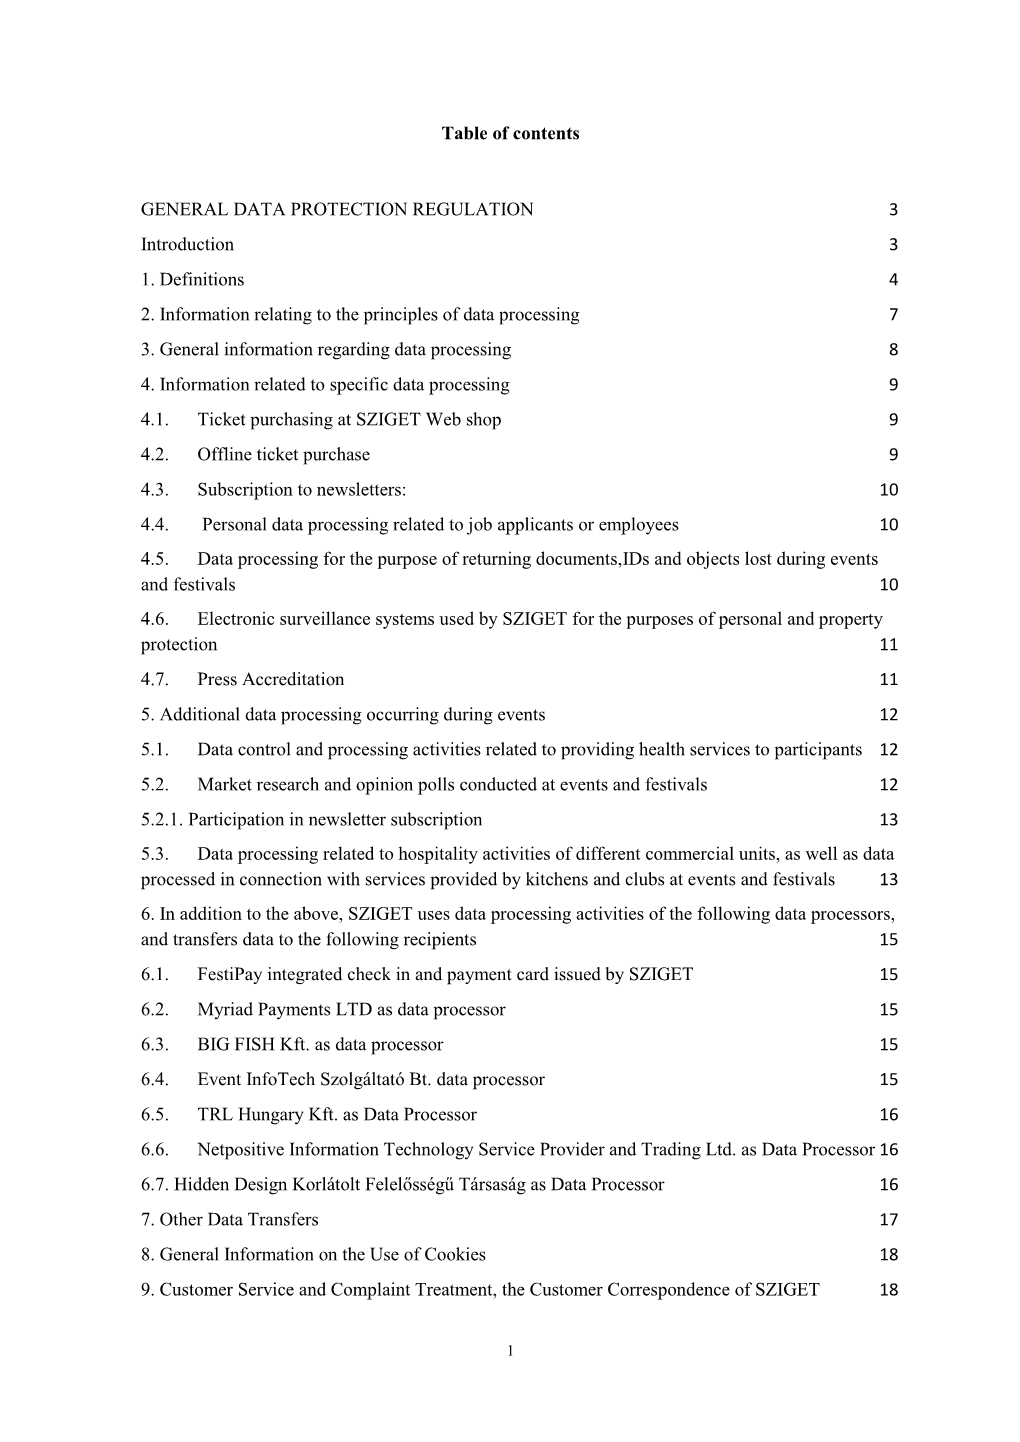 Table of Contents GENERAL DATA PROTECTION REGULATION 3